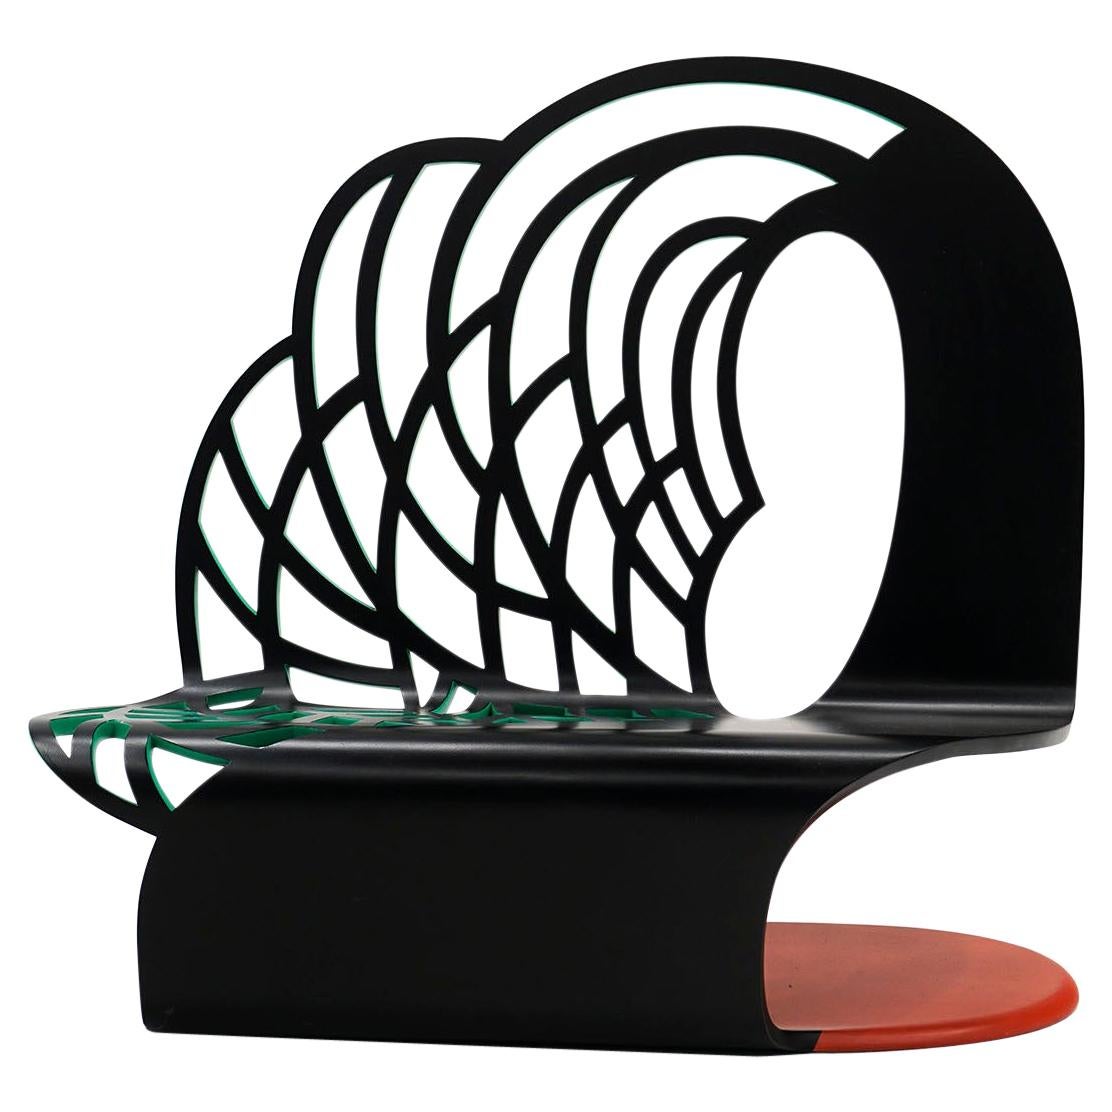 Postmodern Bench with High Back by Alan Siegel, 1986. Signed. #2 in the Edition For Sale